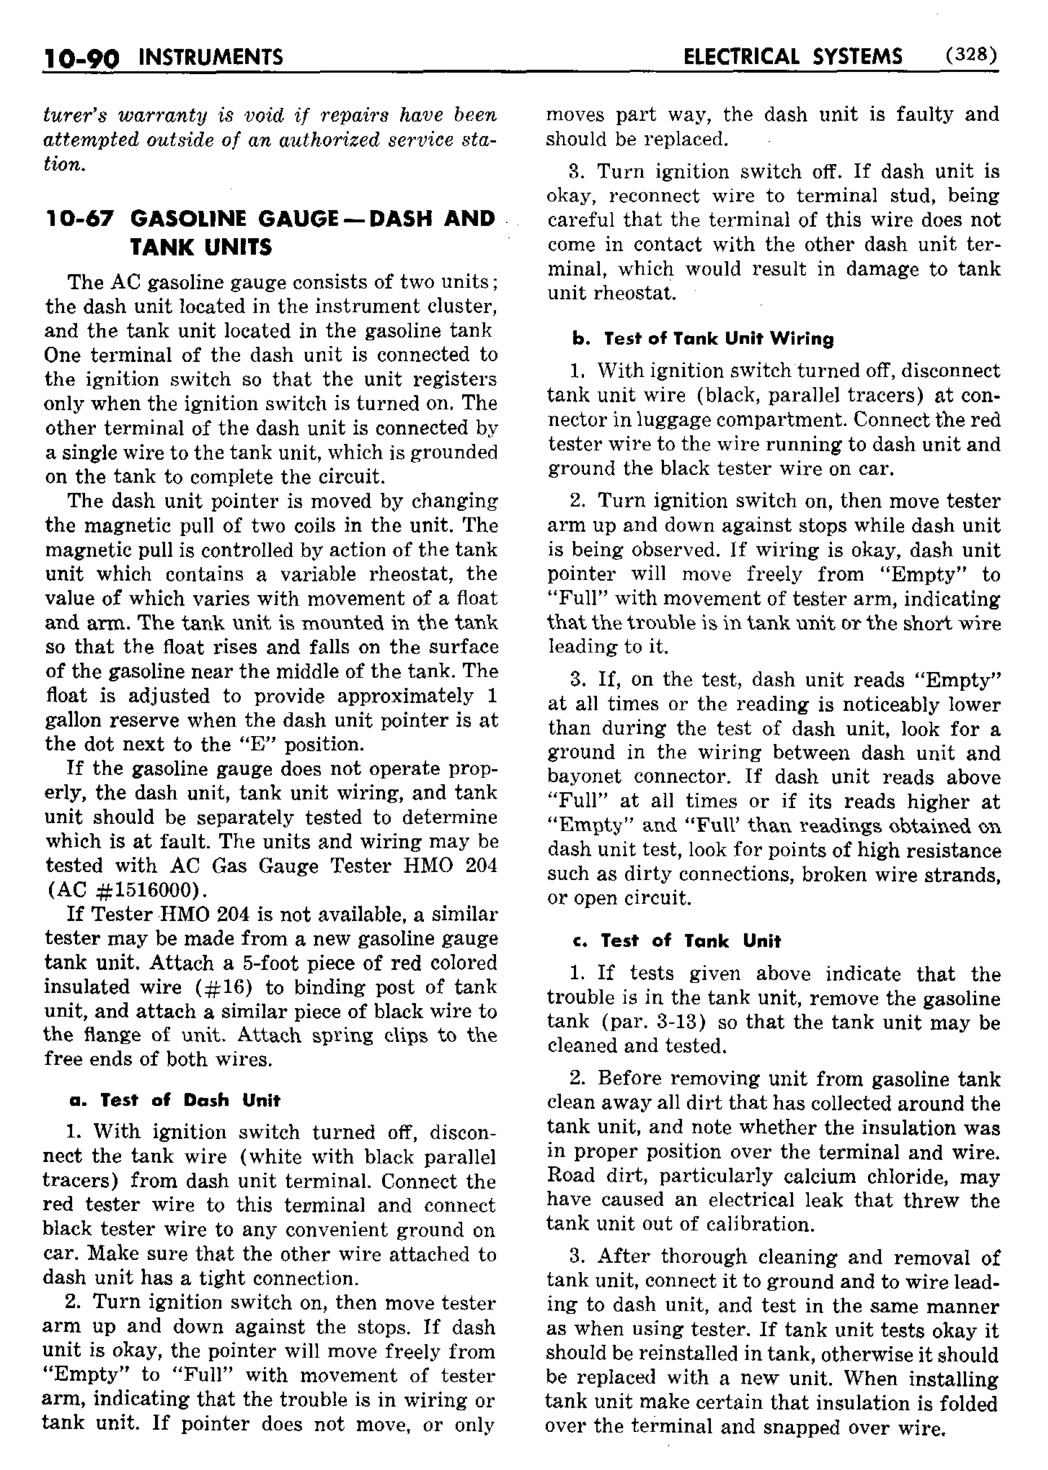 n_11 1950 Buick Shop Manual - Electrical Systems-090-090.jpg